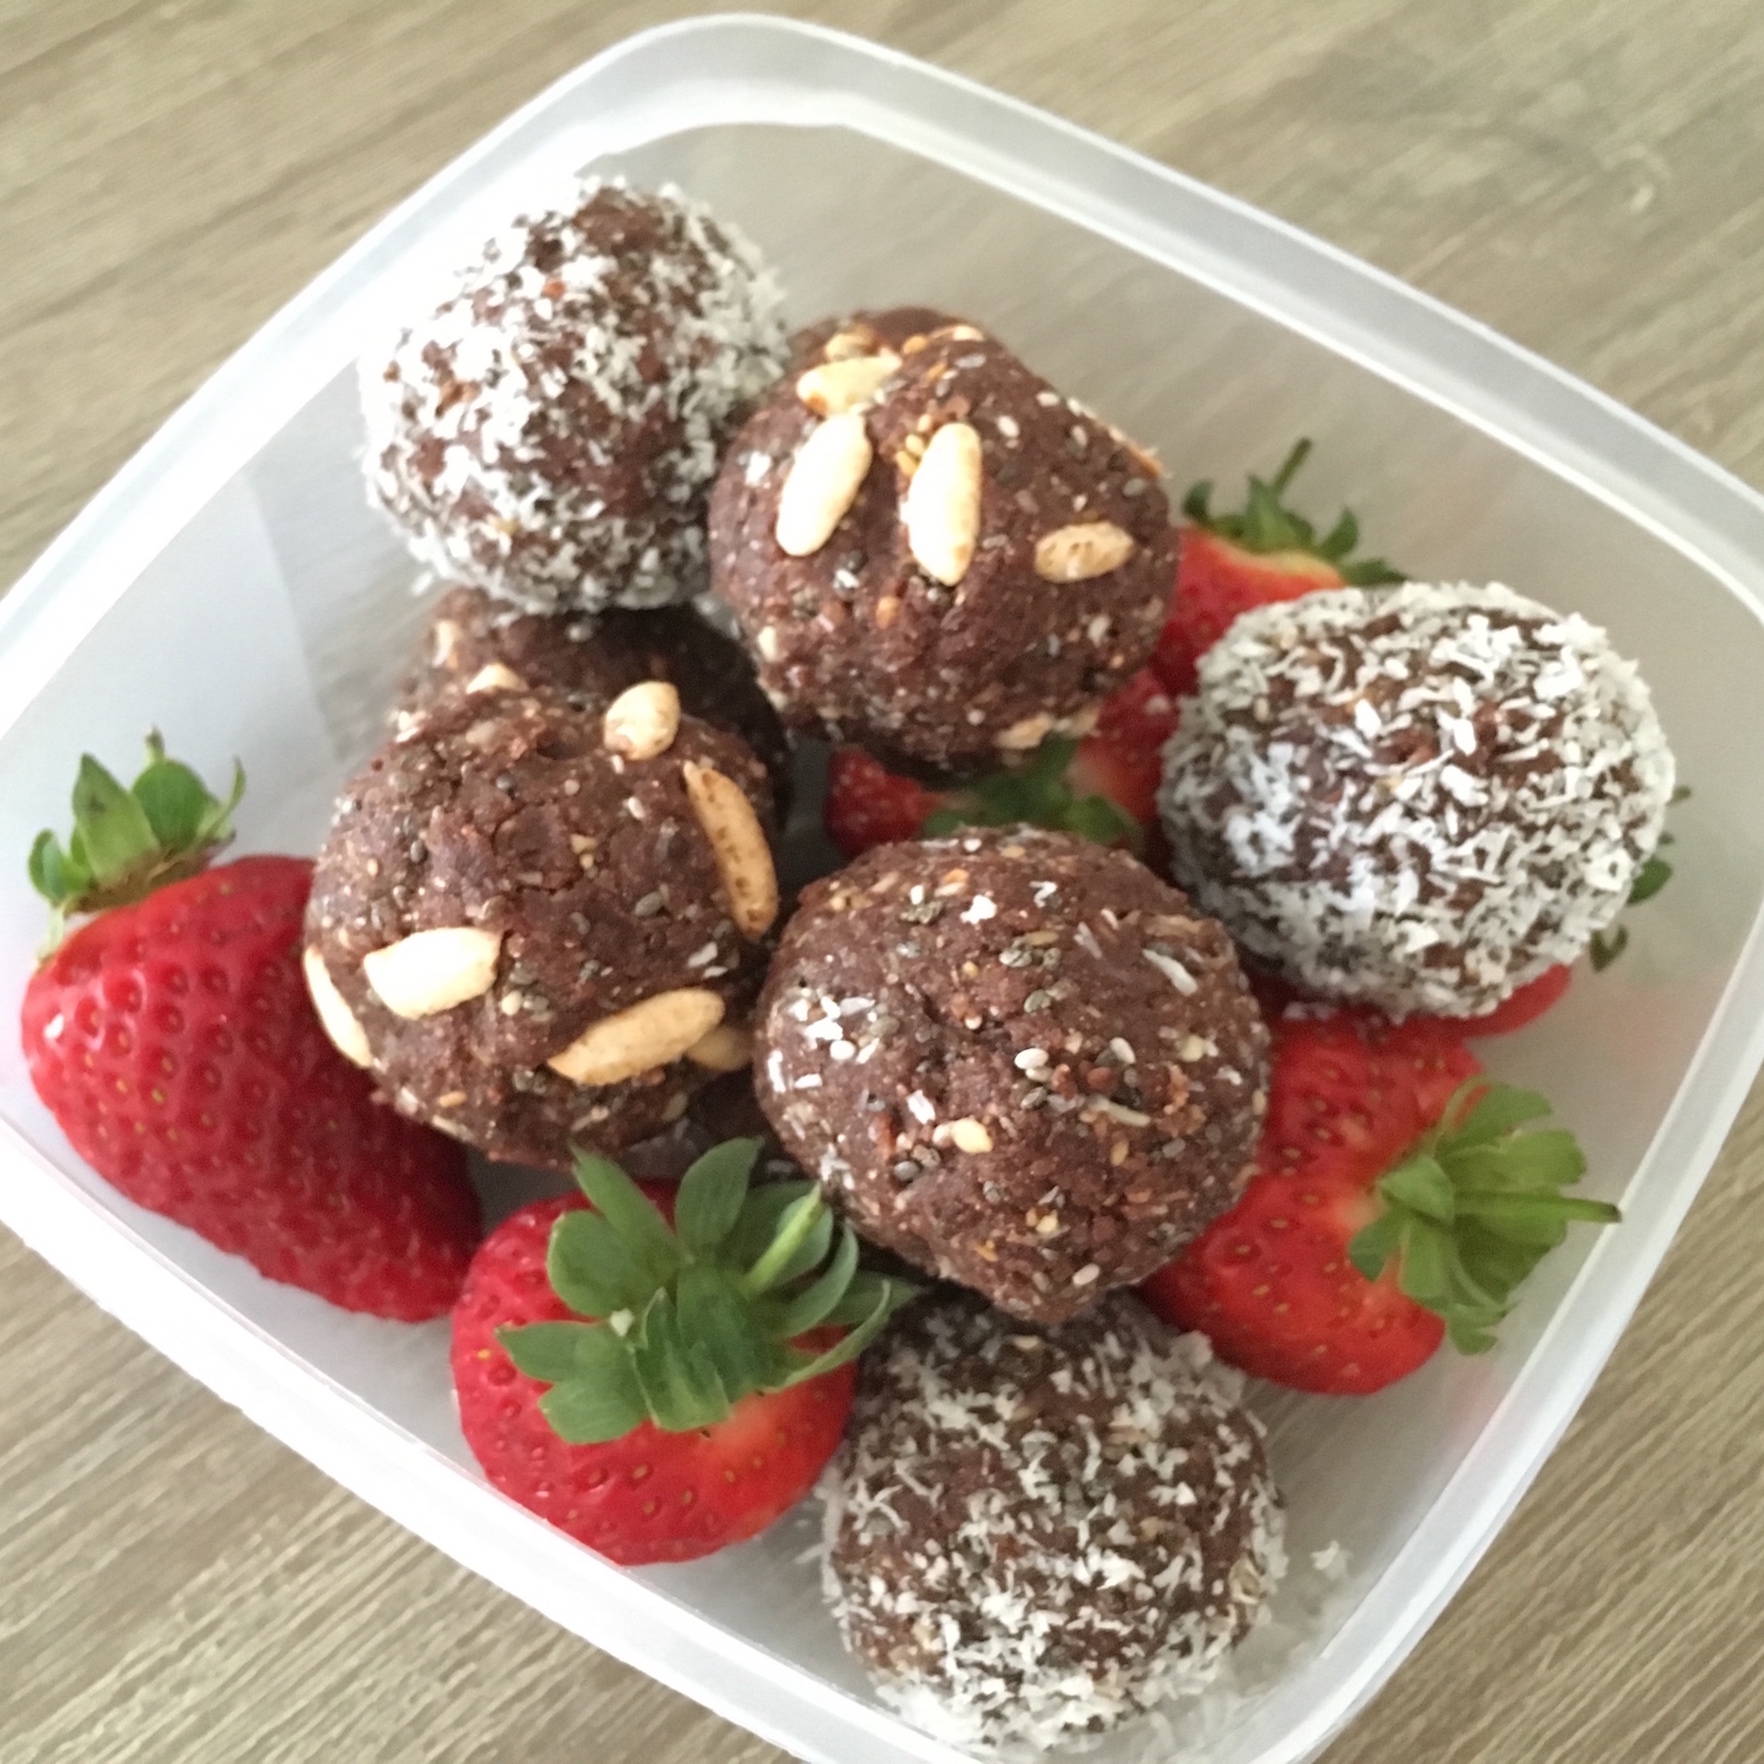 Choc vanilla bliss balls in a container with strawberries